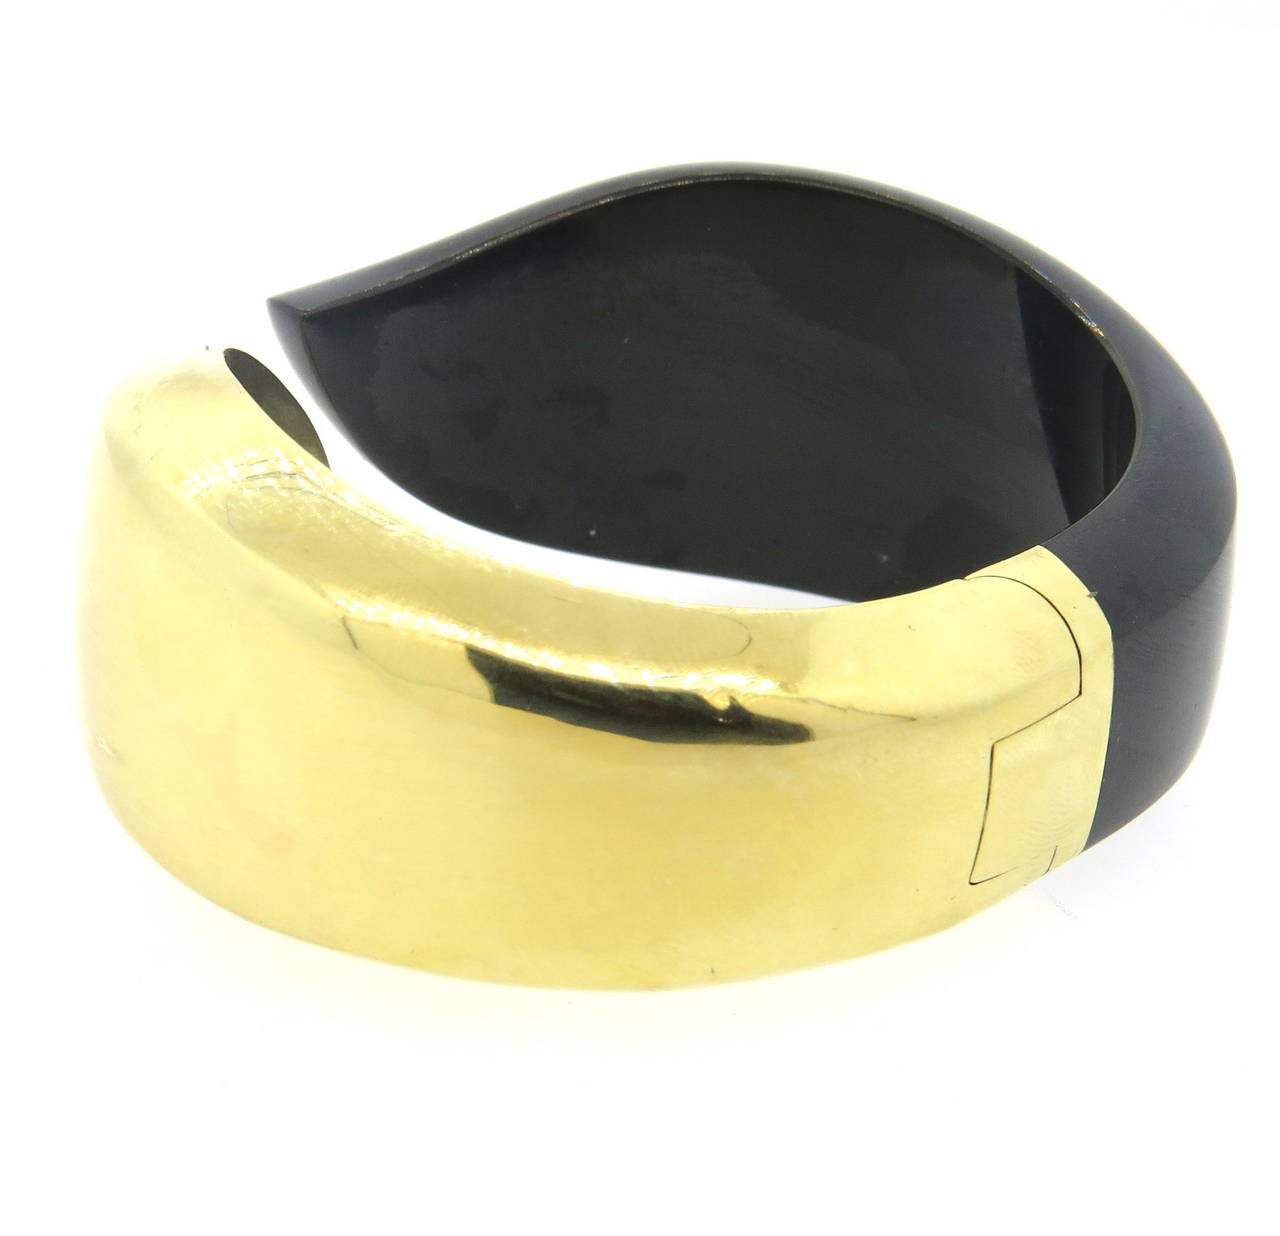 An 18k yellow gold and black onyx bracelet crafted by Elsa Peretti for Tiffany & Co.  The bracelet comfortably fits up to a 7